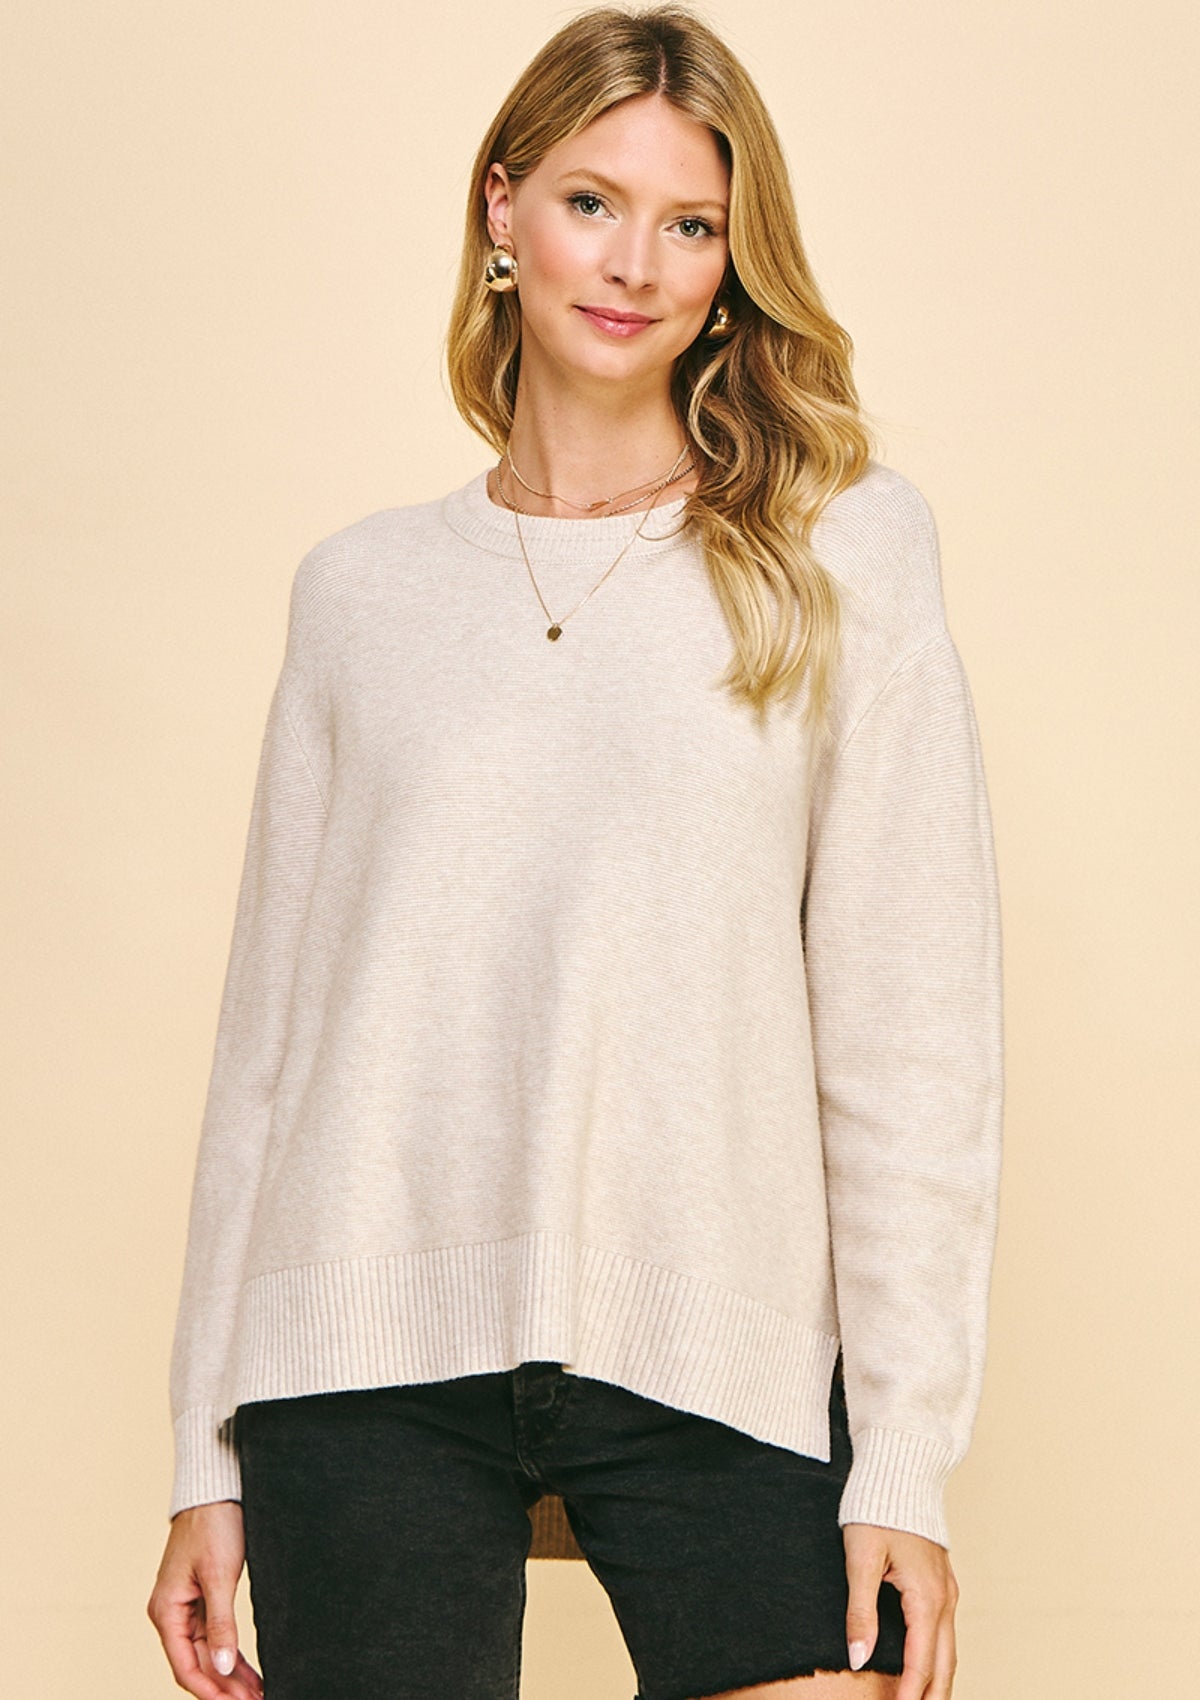 Oatmeal Color Crewneck Sweater -Pinch- Ruby Jane-